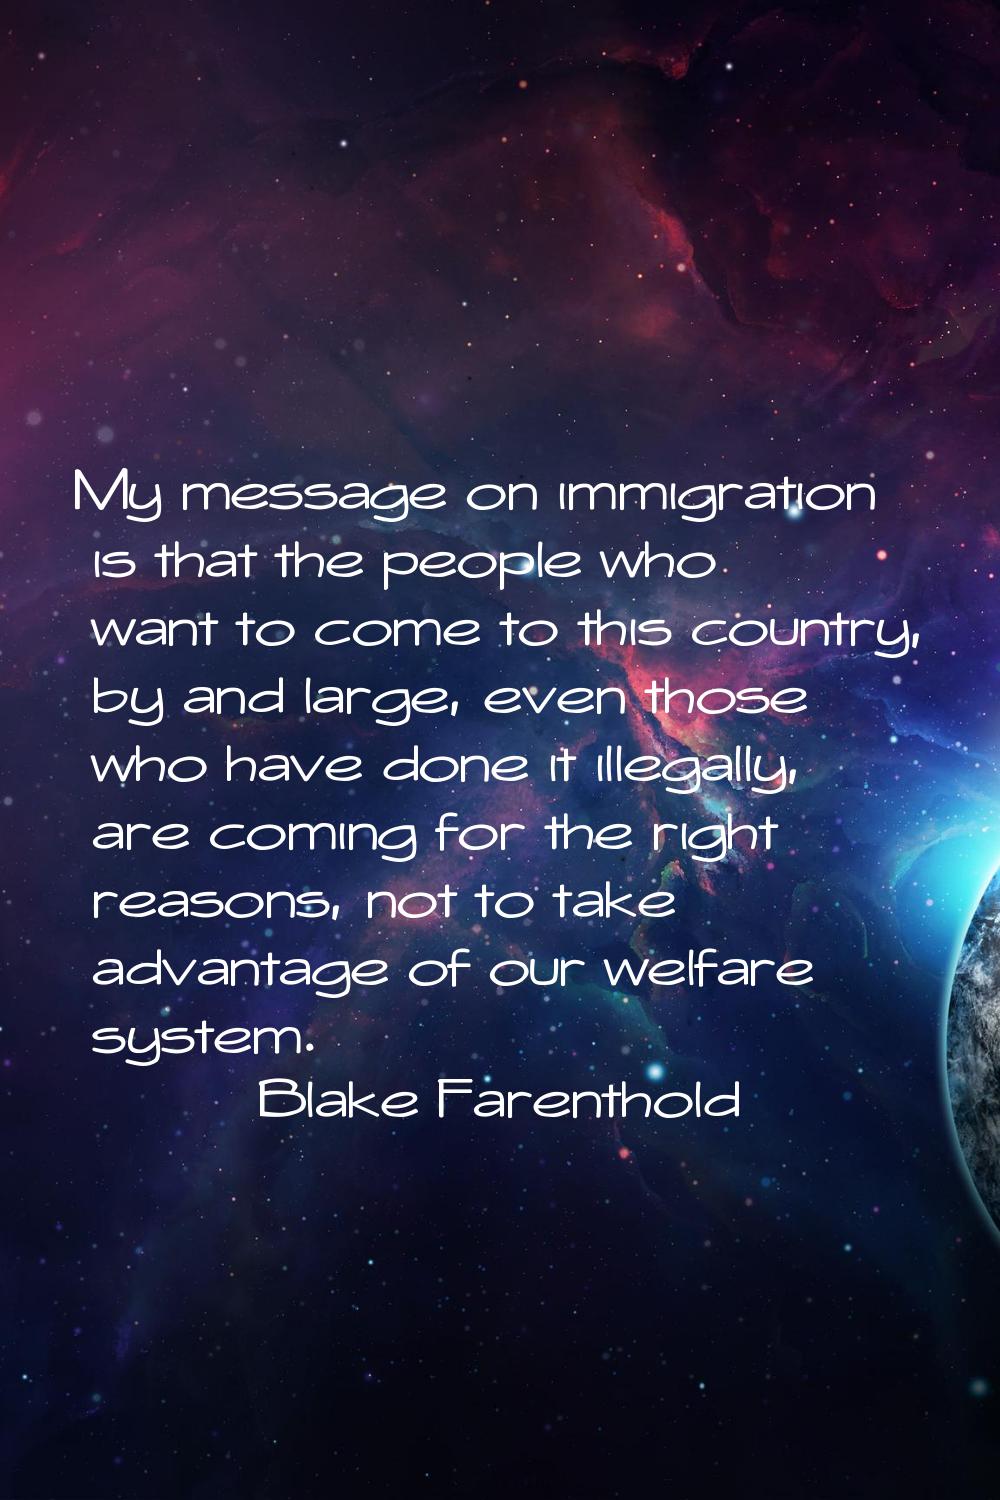 My message on immigration is that the people who want to come to this country, by and large, even t